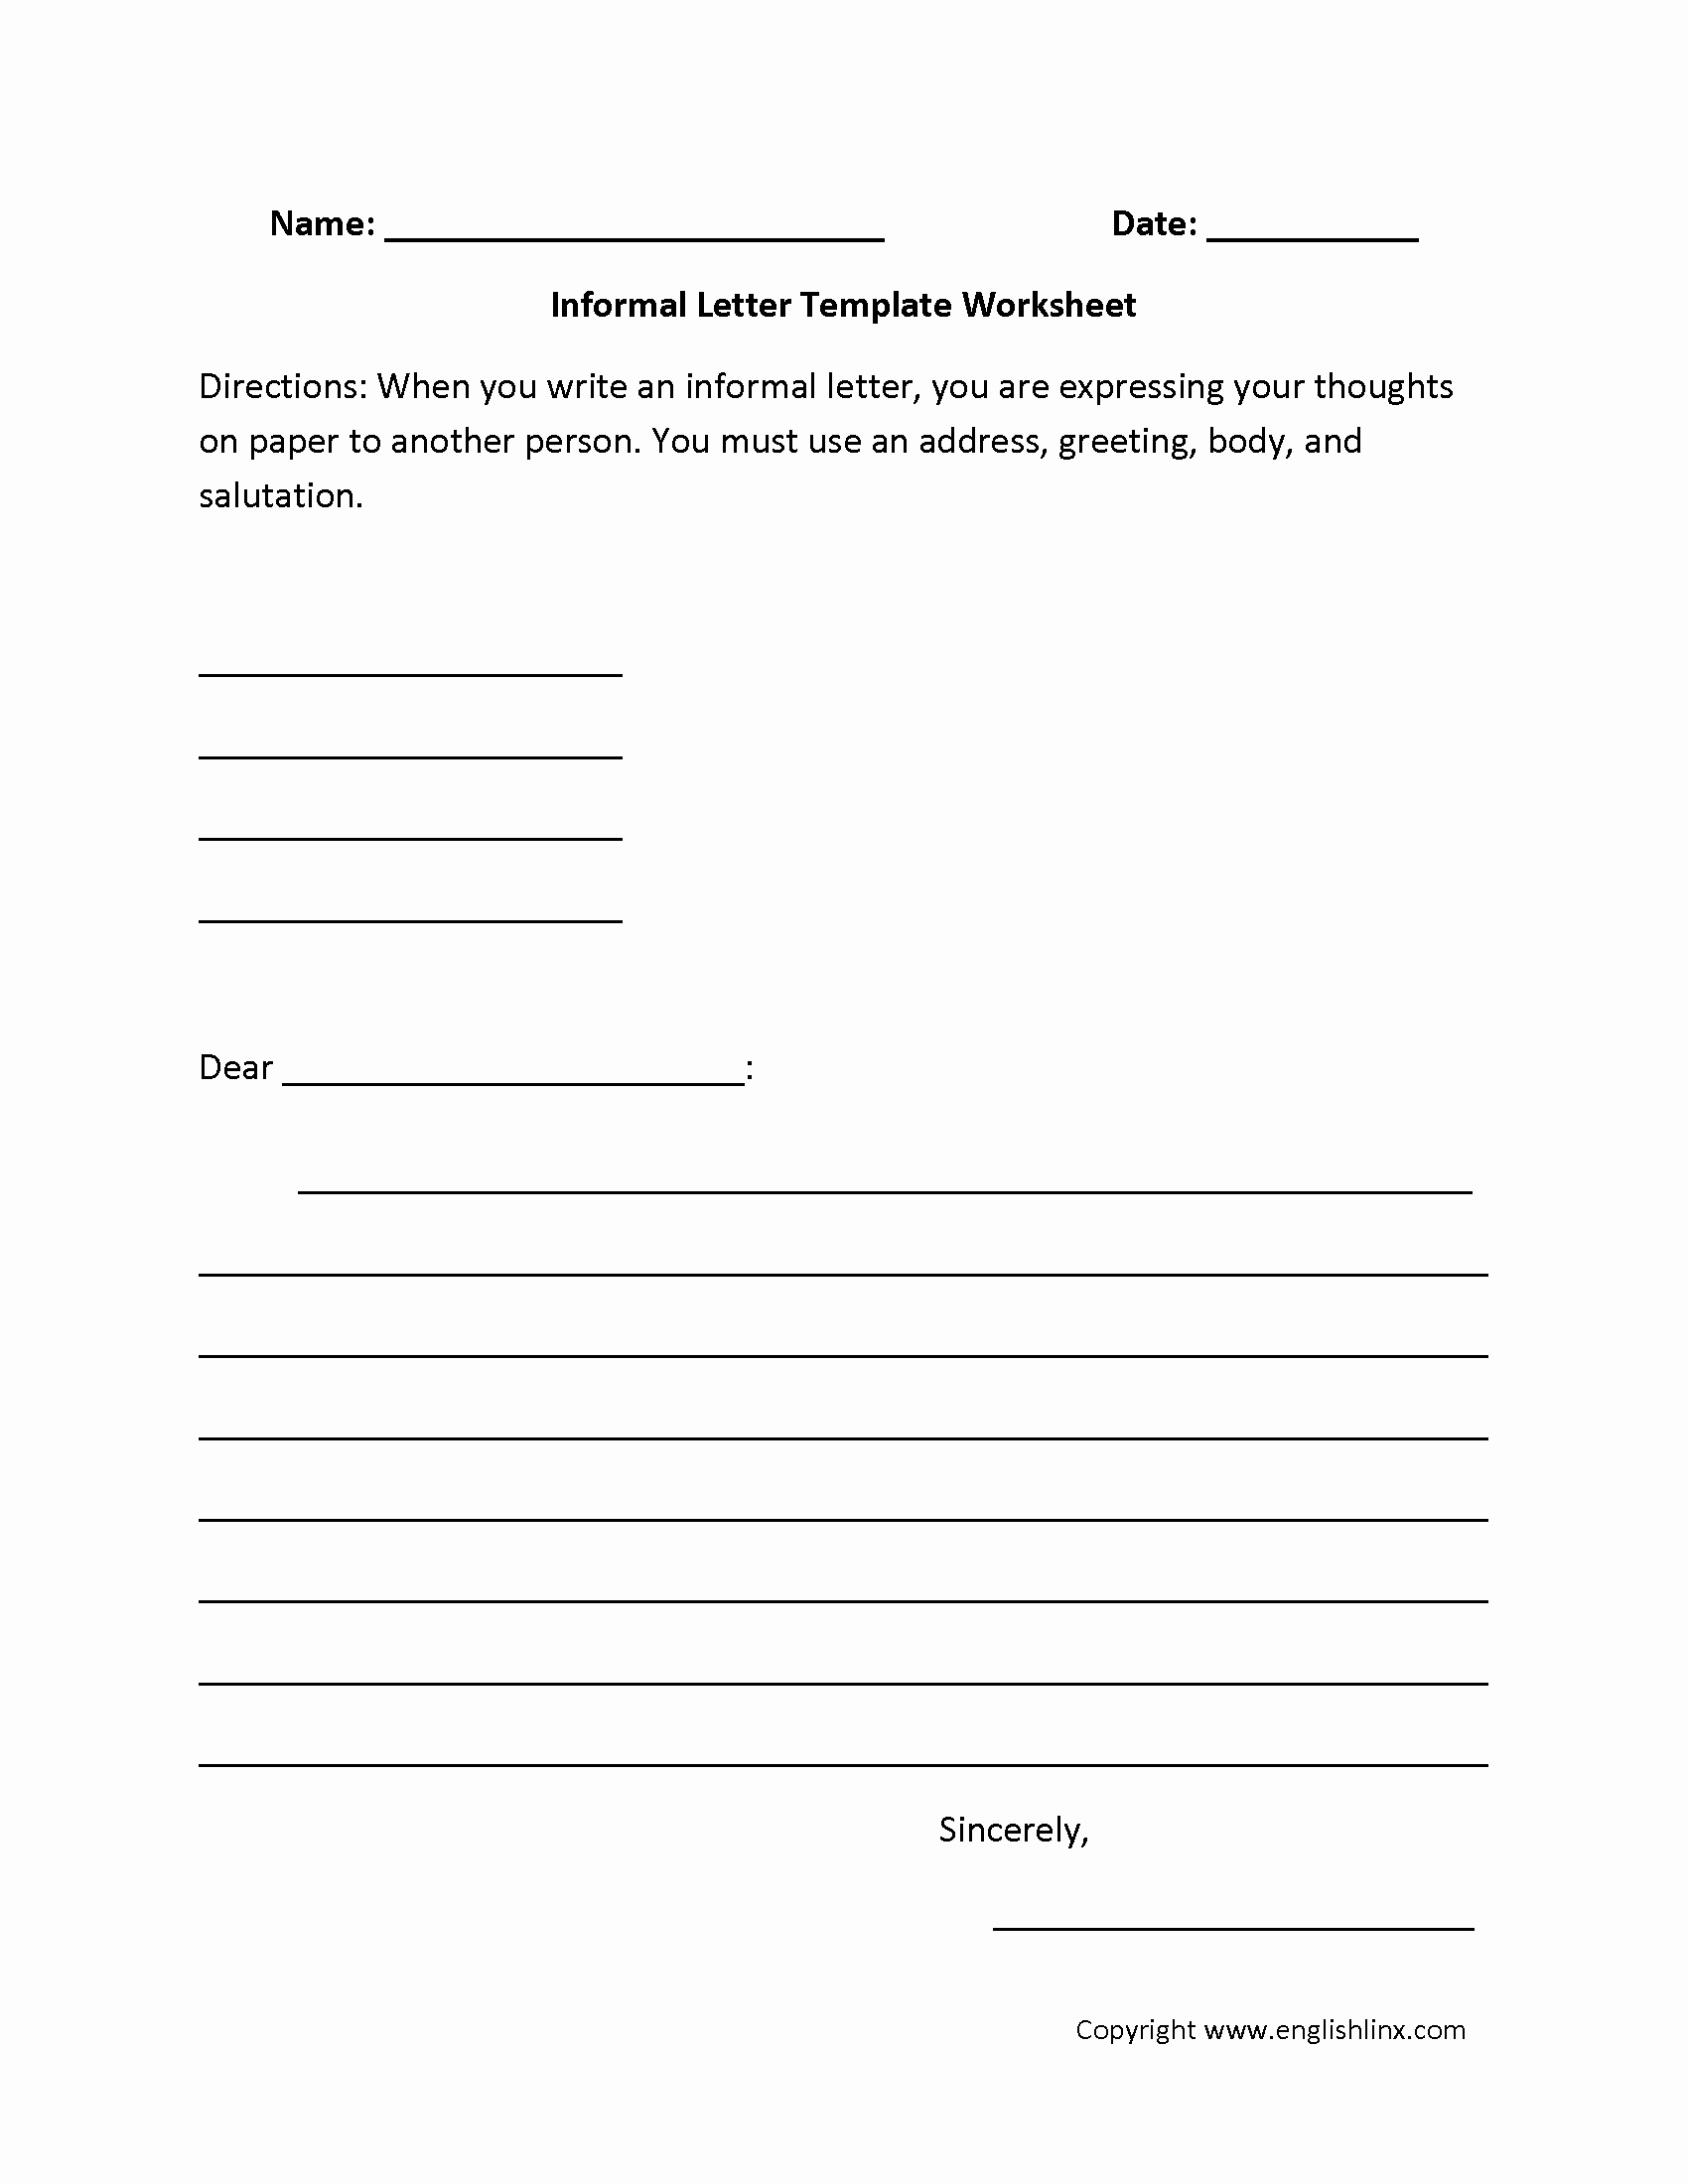 eviction-letter-template-texas-collection-letter-template-collection